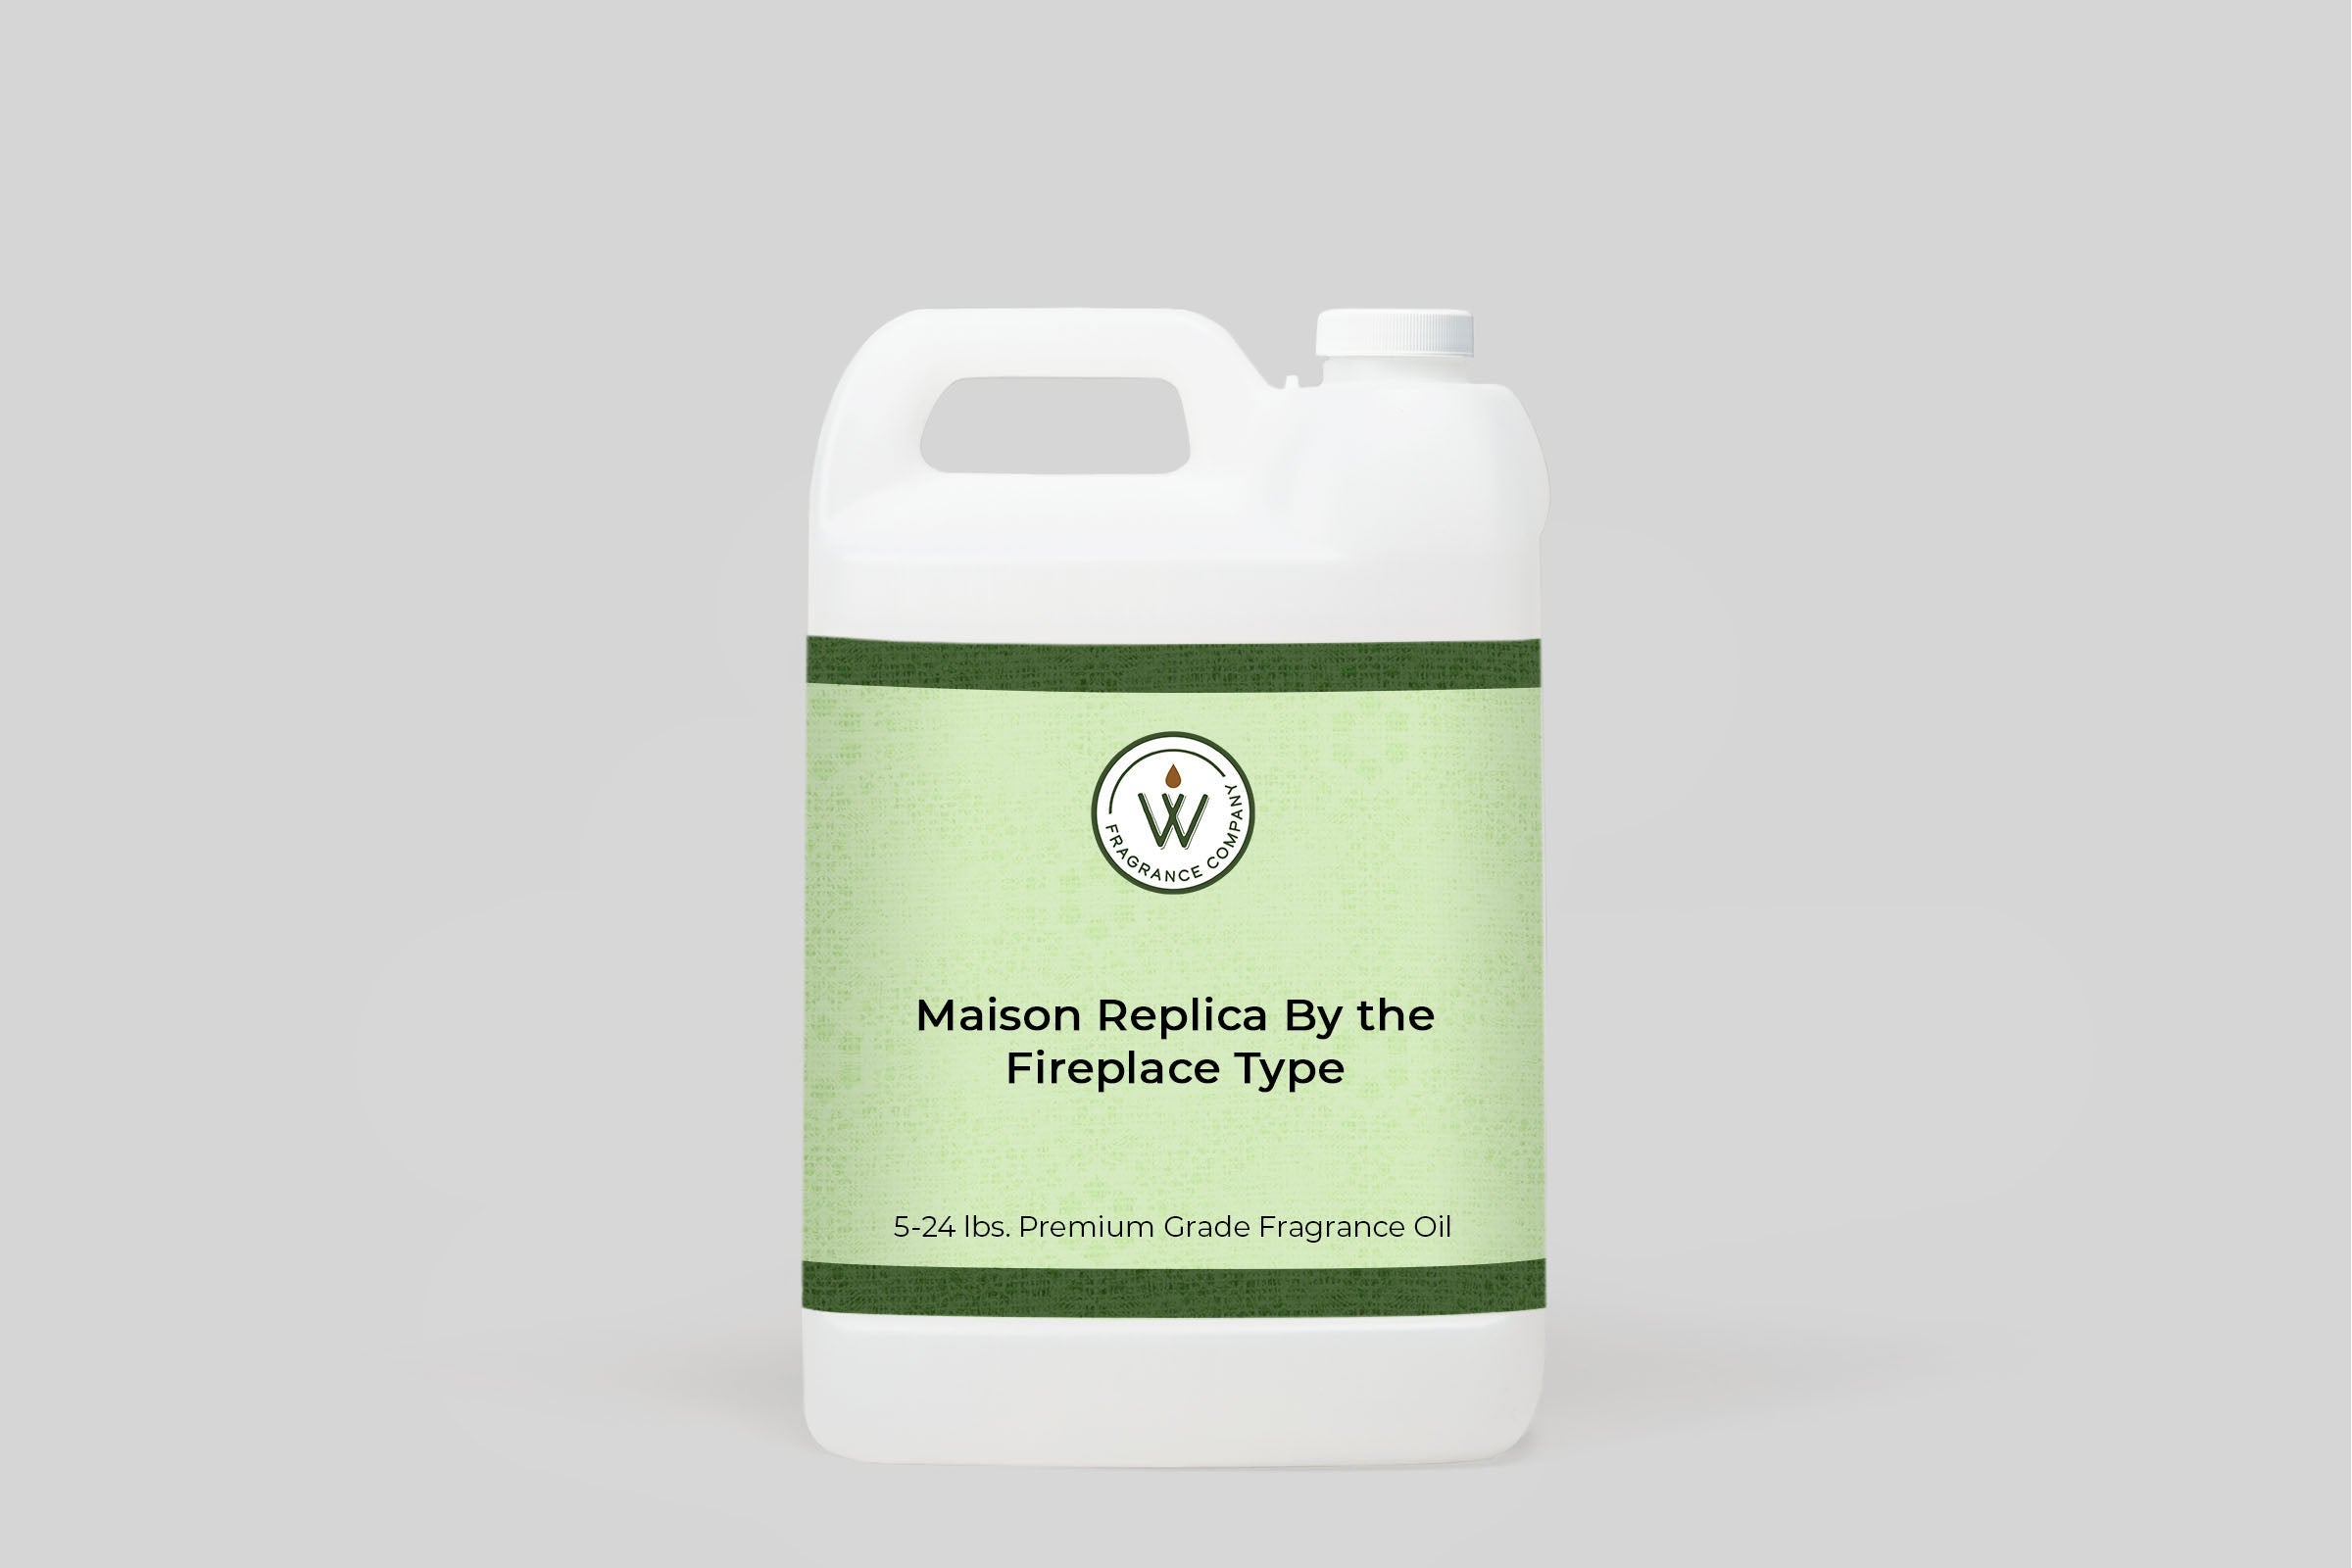 Maison Replica By the Fireplace Type Fragrance Oil